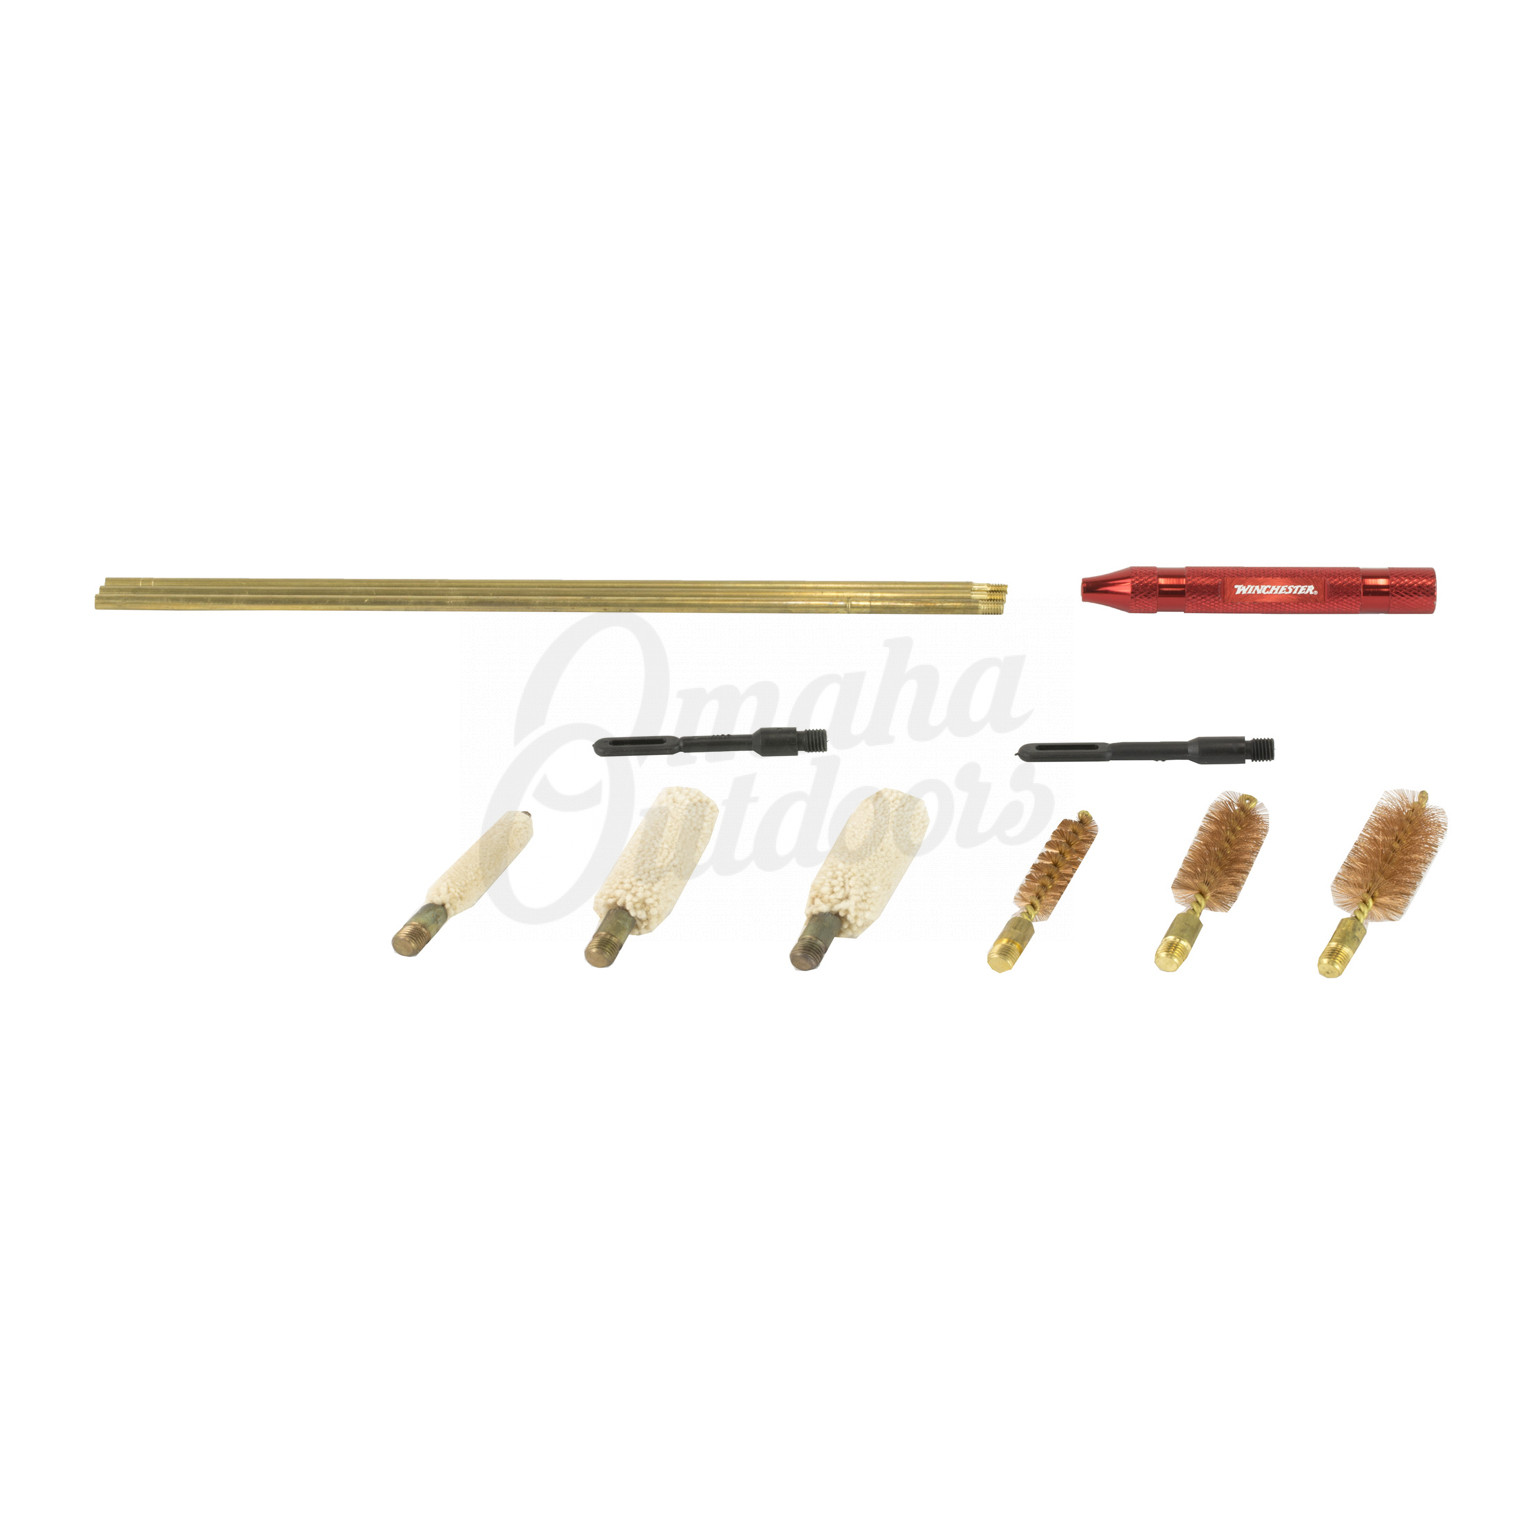 DAC Winchester Shotgun Cleaning Kit 14 Pieces - Omaha Outdoors